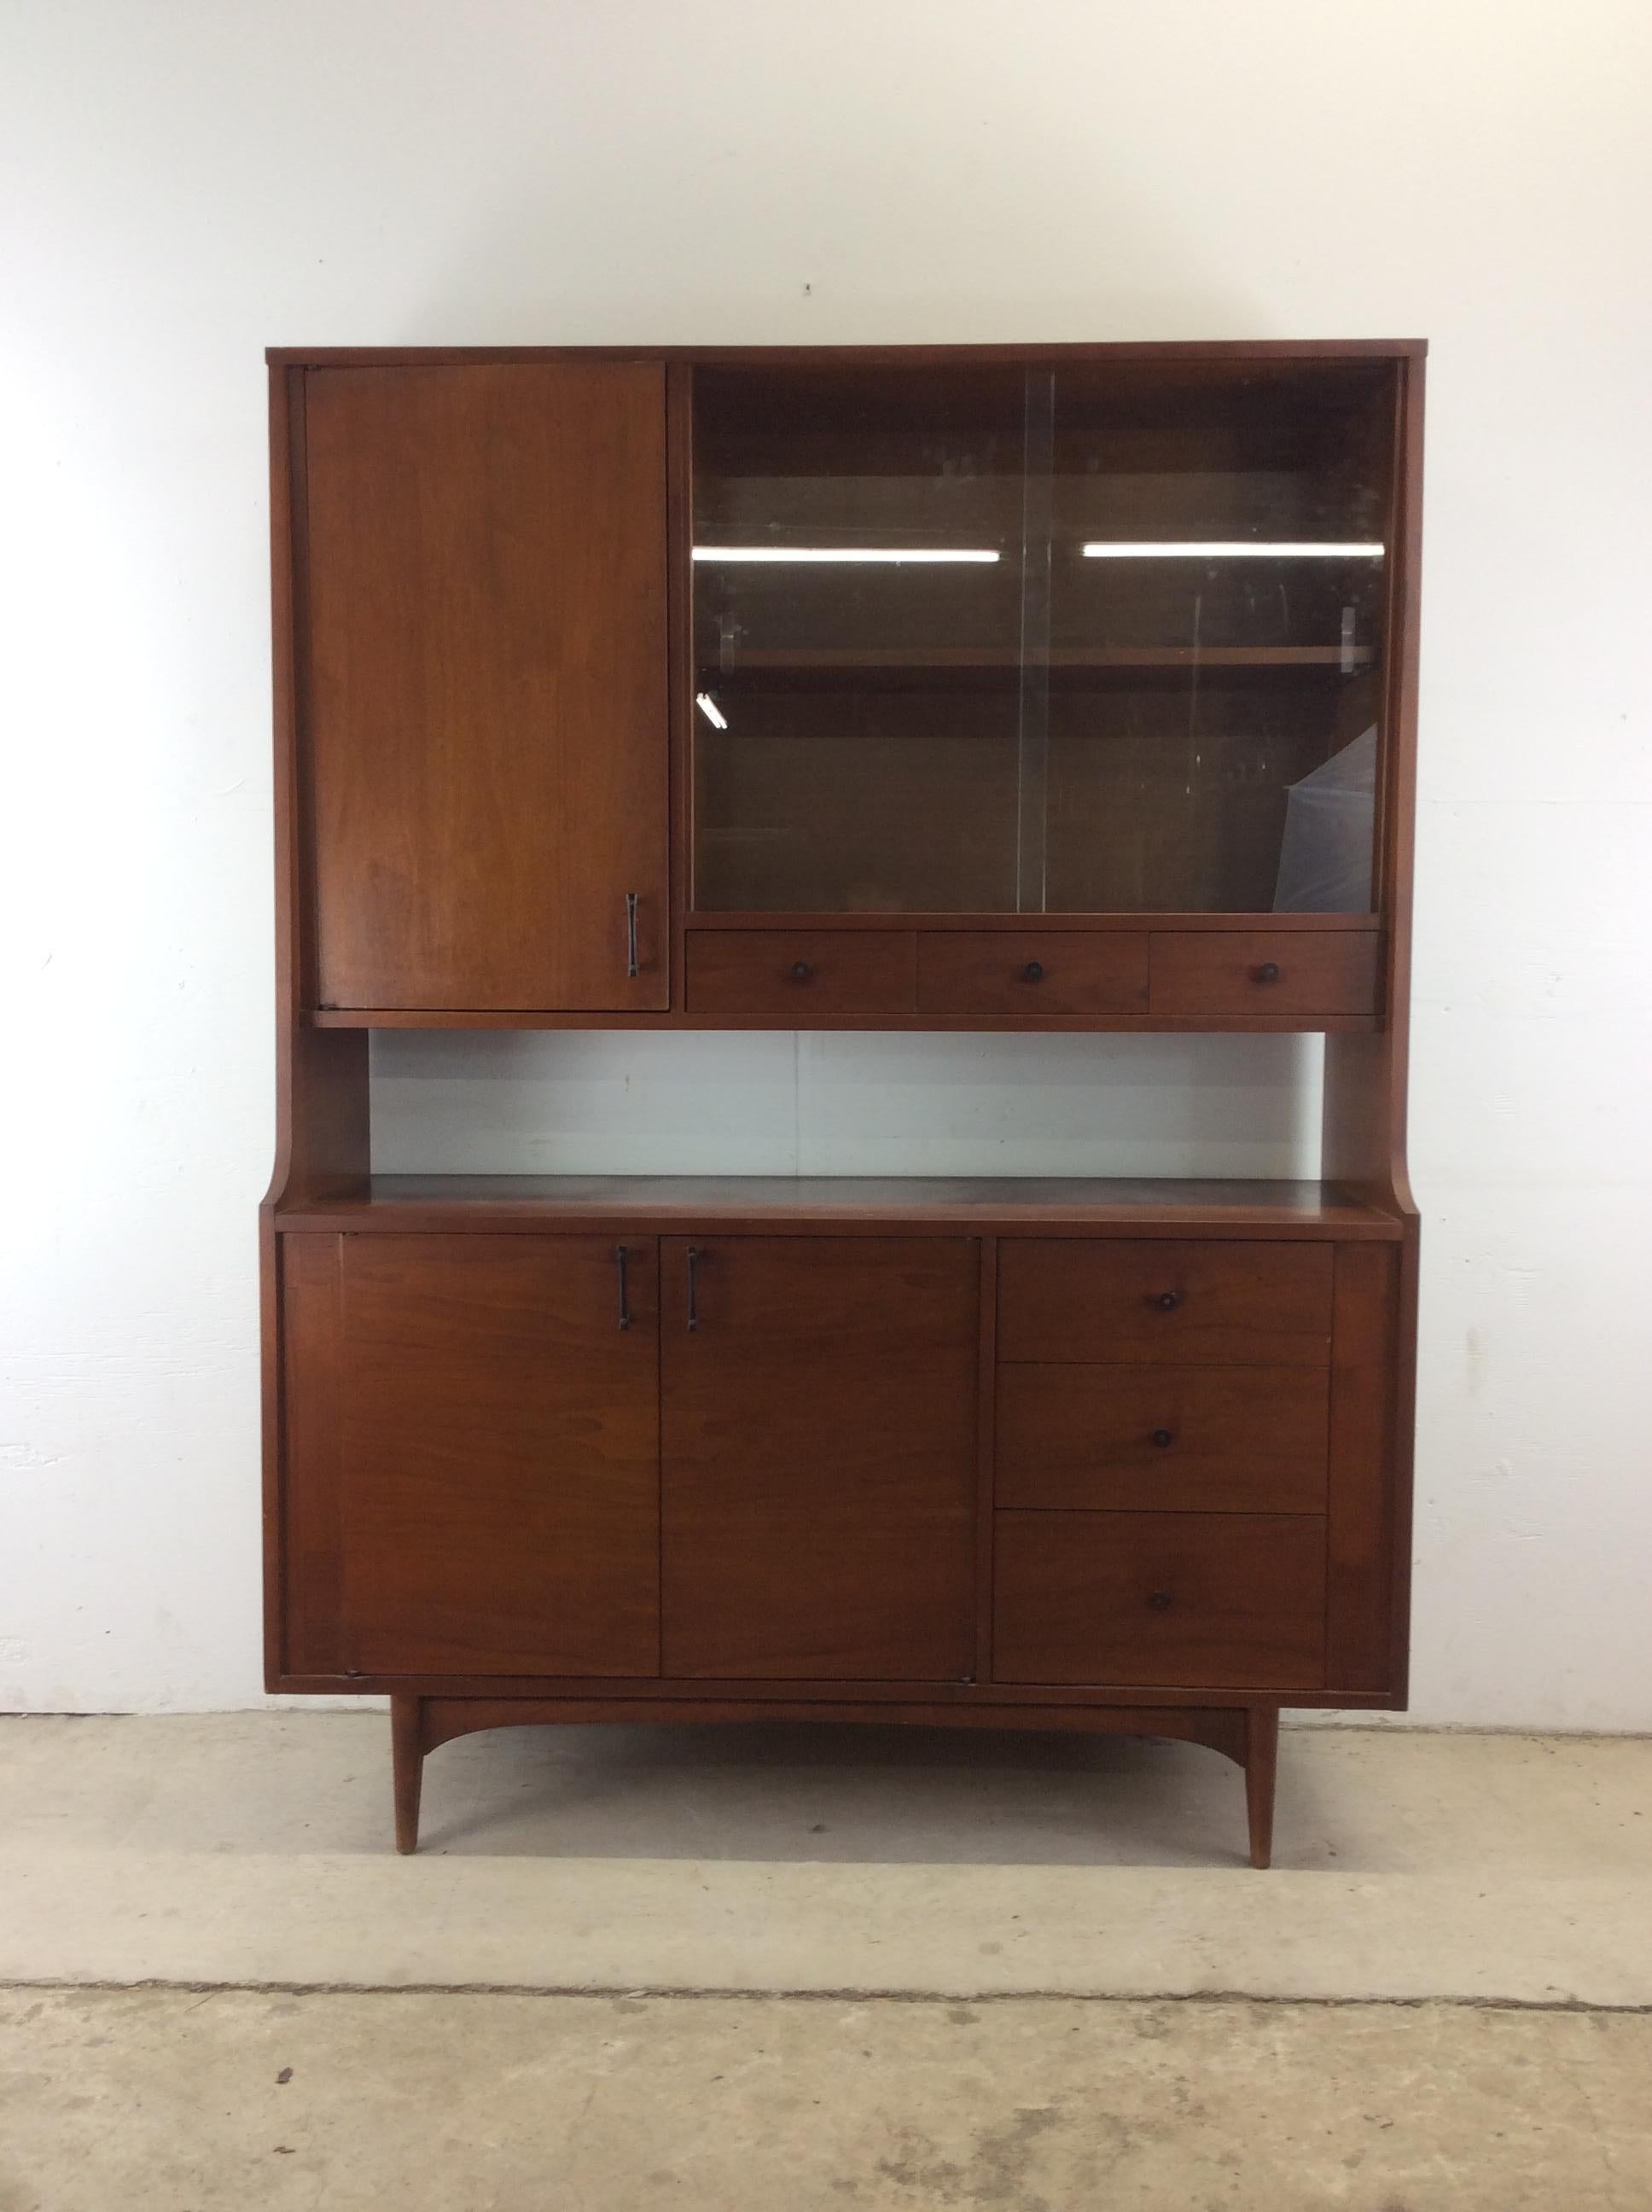 This mid century modern china cabinet by Kroehler features hardwood construction, one piece design, walnut veneer with original finish, five dovetailed drawers with brass accented hardware, two cabinets with adjustable shelves, and sliding glass